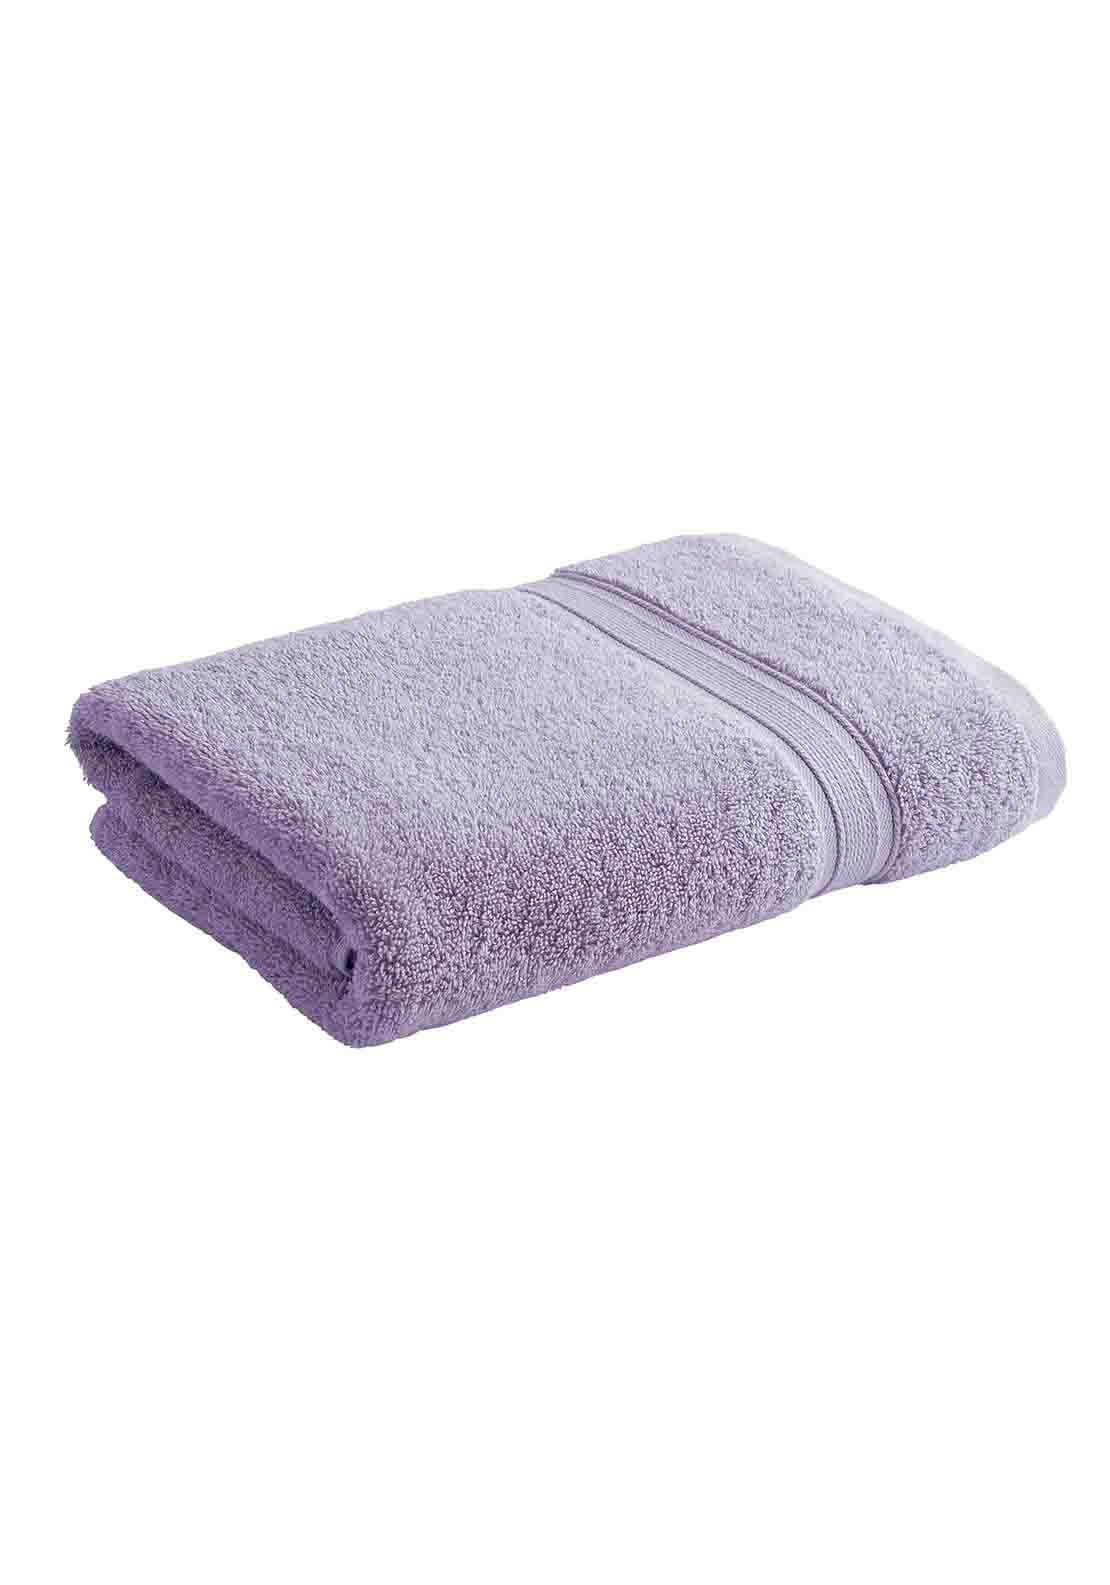 Christy Serene Hand Towel - Lilac Petal 1 Shaws Department Stores